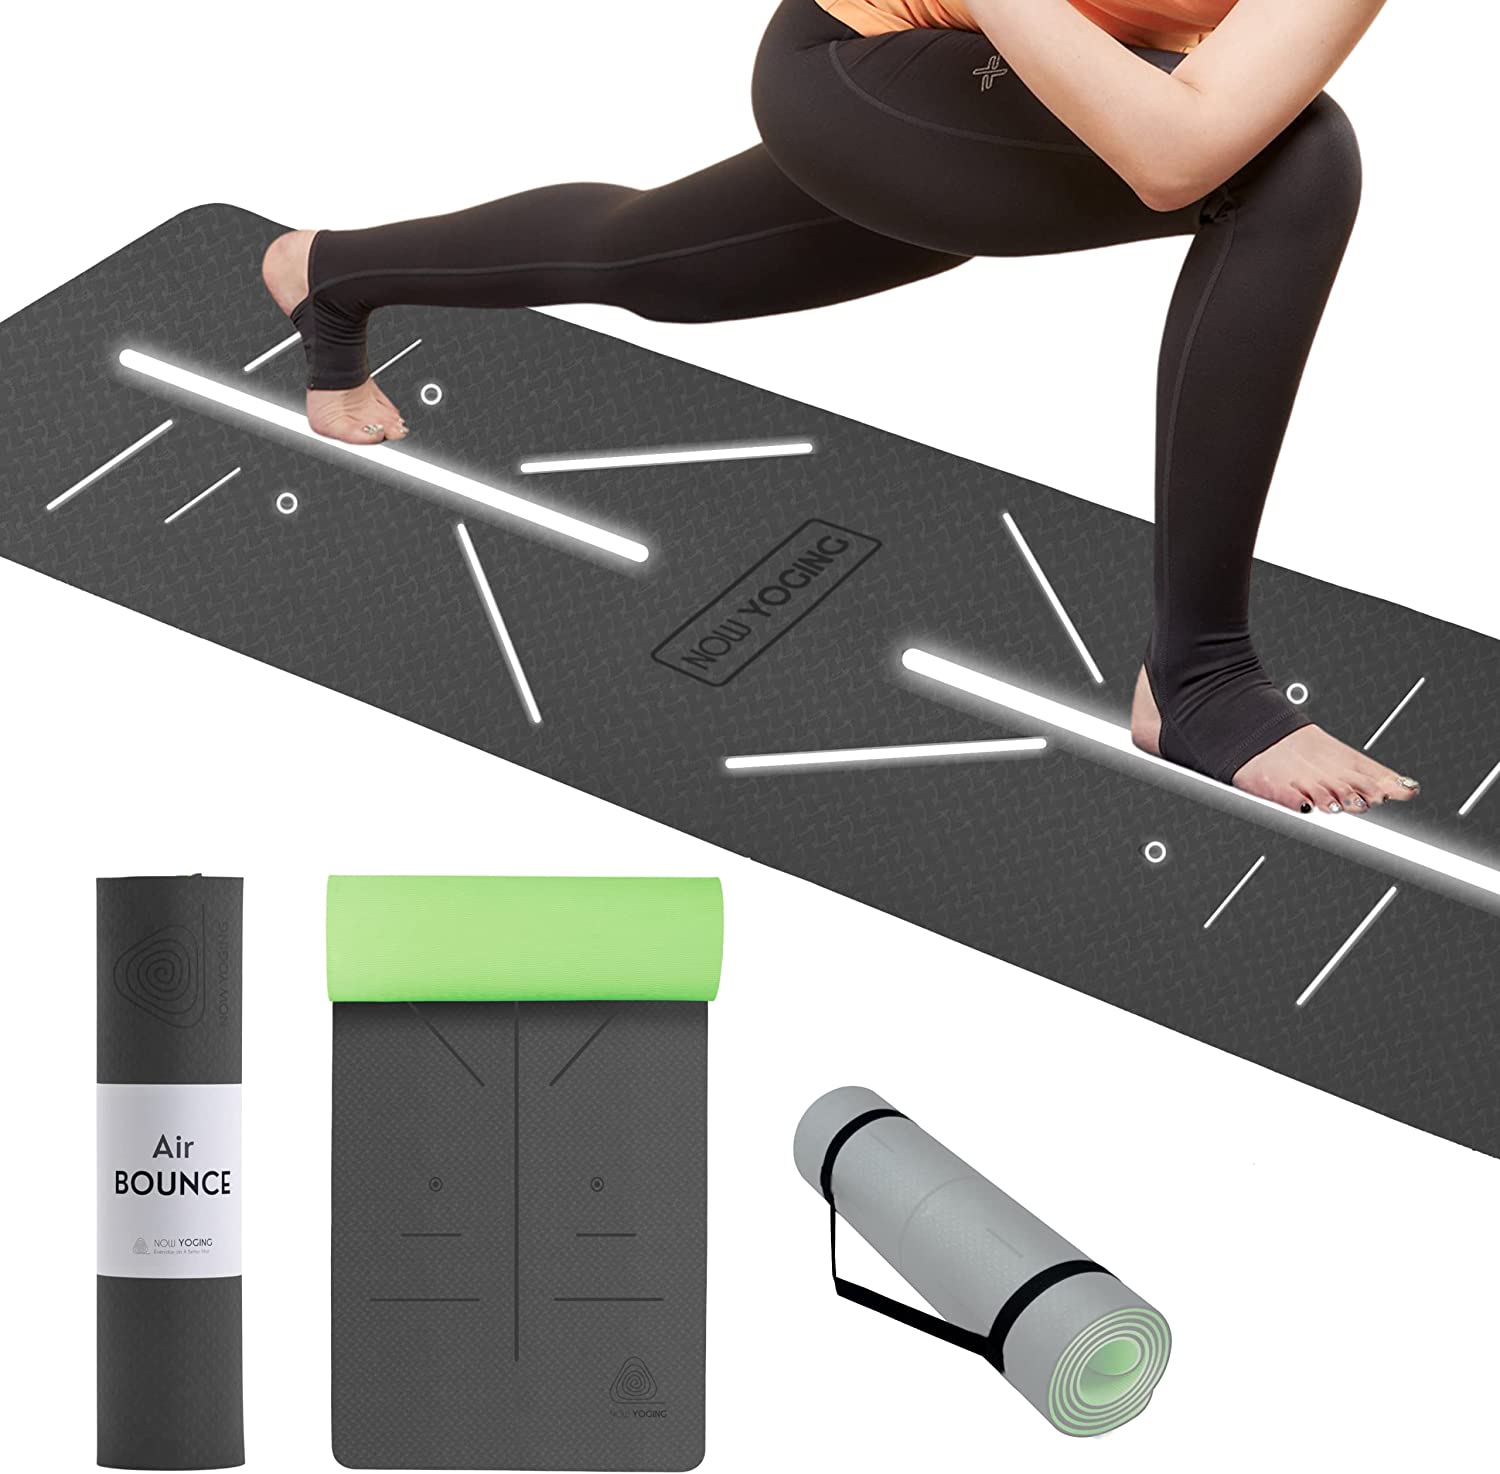 Unbeatable-8mm-Thickness-Yoga-Mat-with-Alignment-lines-Free-Carrying-Strap-Non-lip-TPE-surface-for-Women-&-Men-for-Fitness-Home